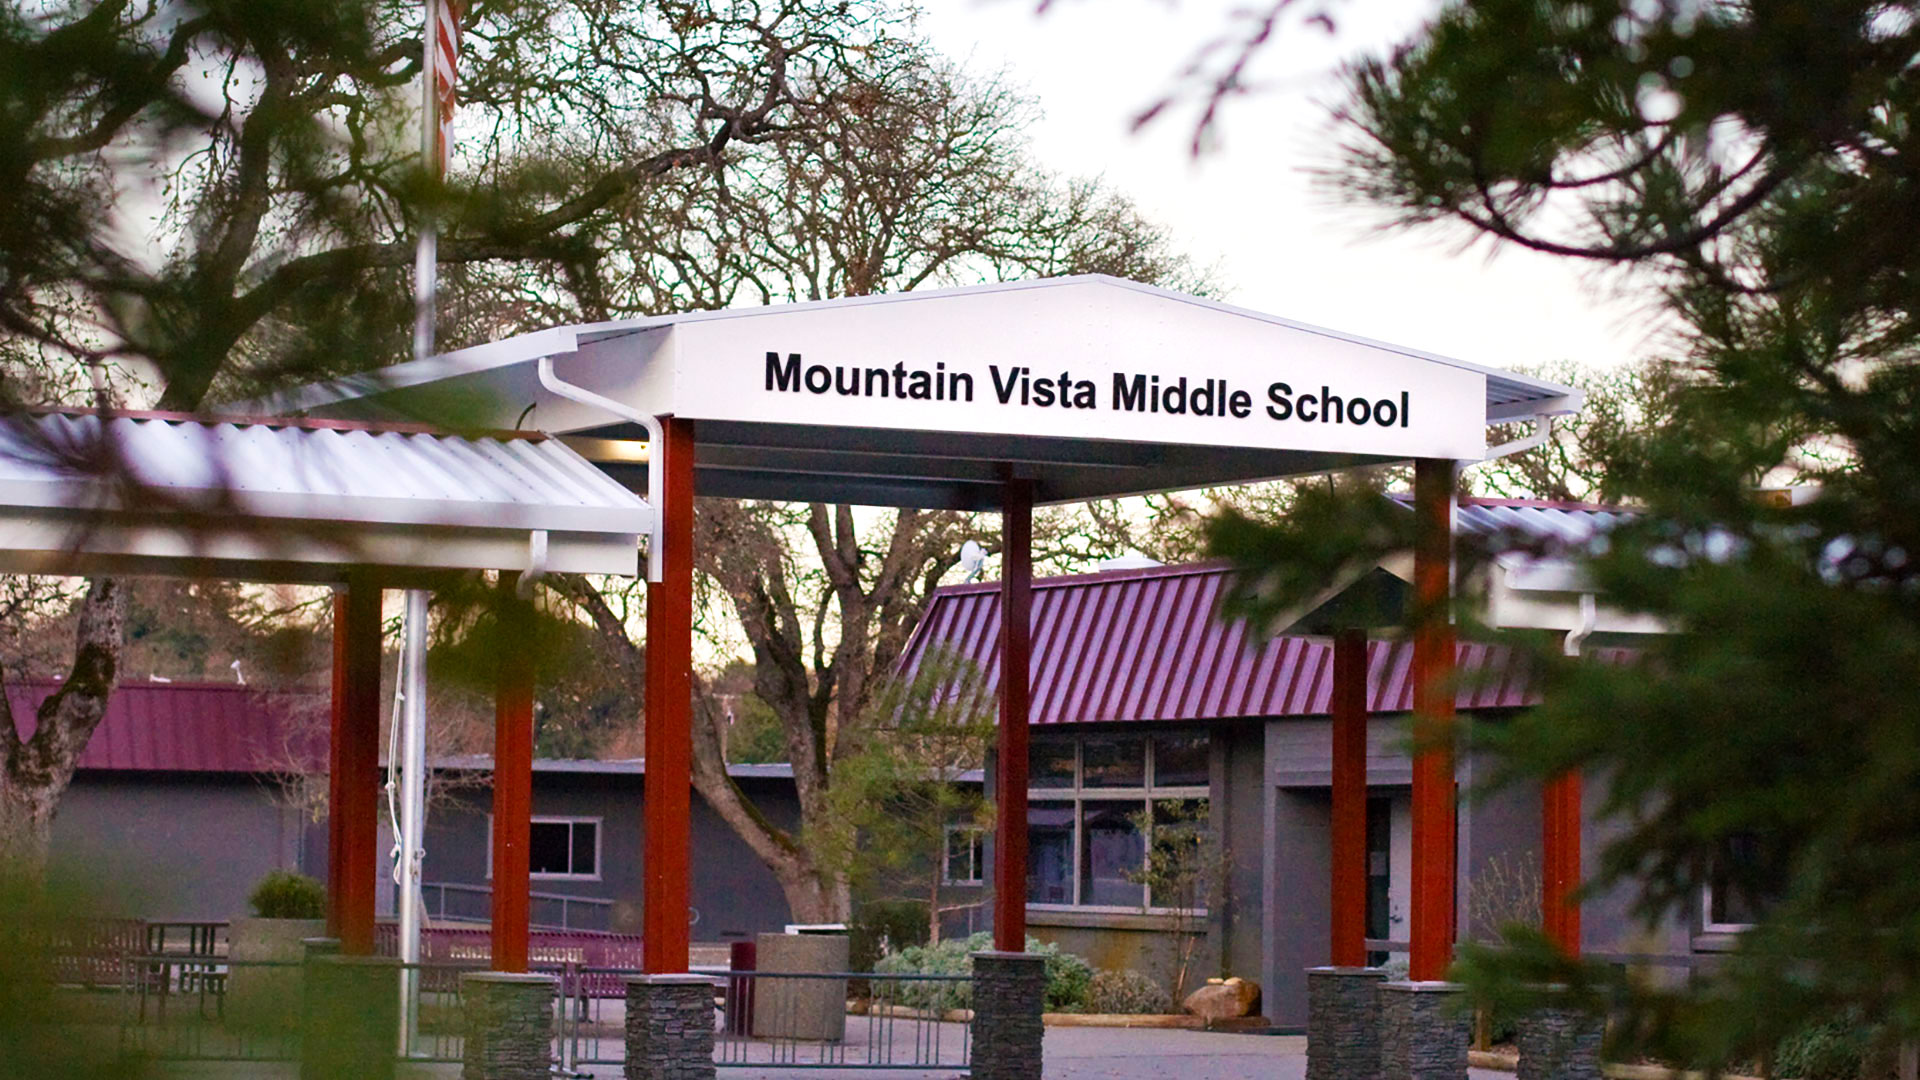 Metal shade structure, with red posts and white tops, with the school name lettered at the entrance.